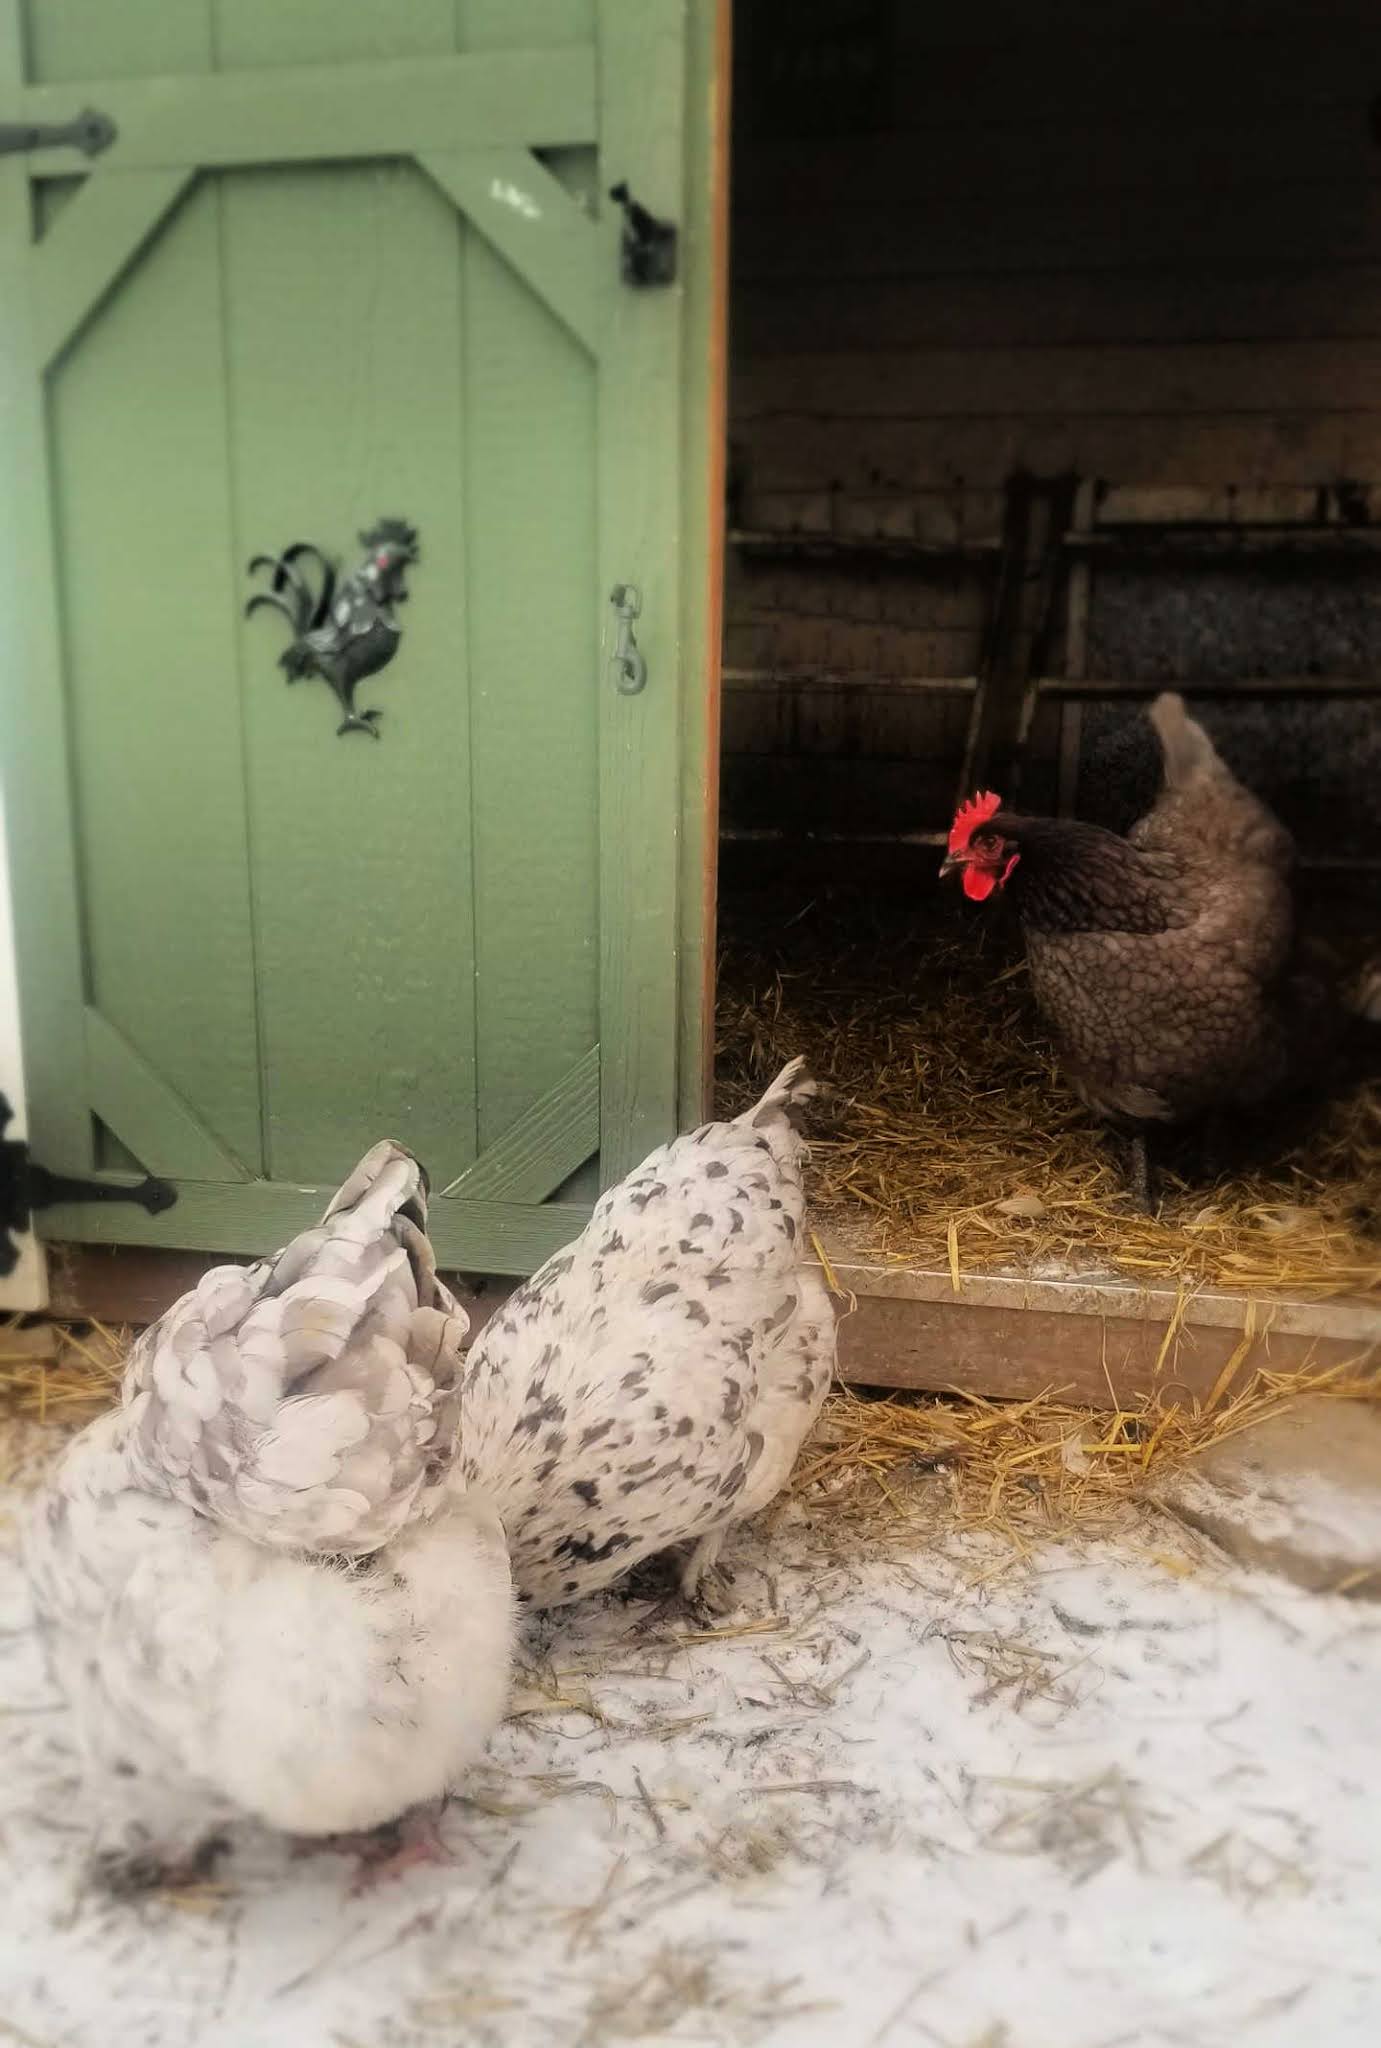 Surviving Winter with Chickens